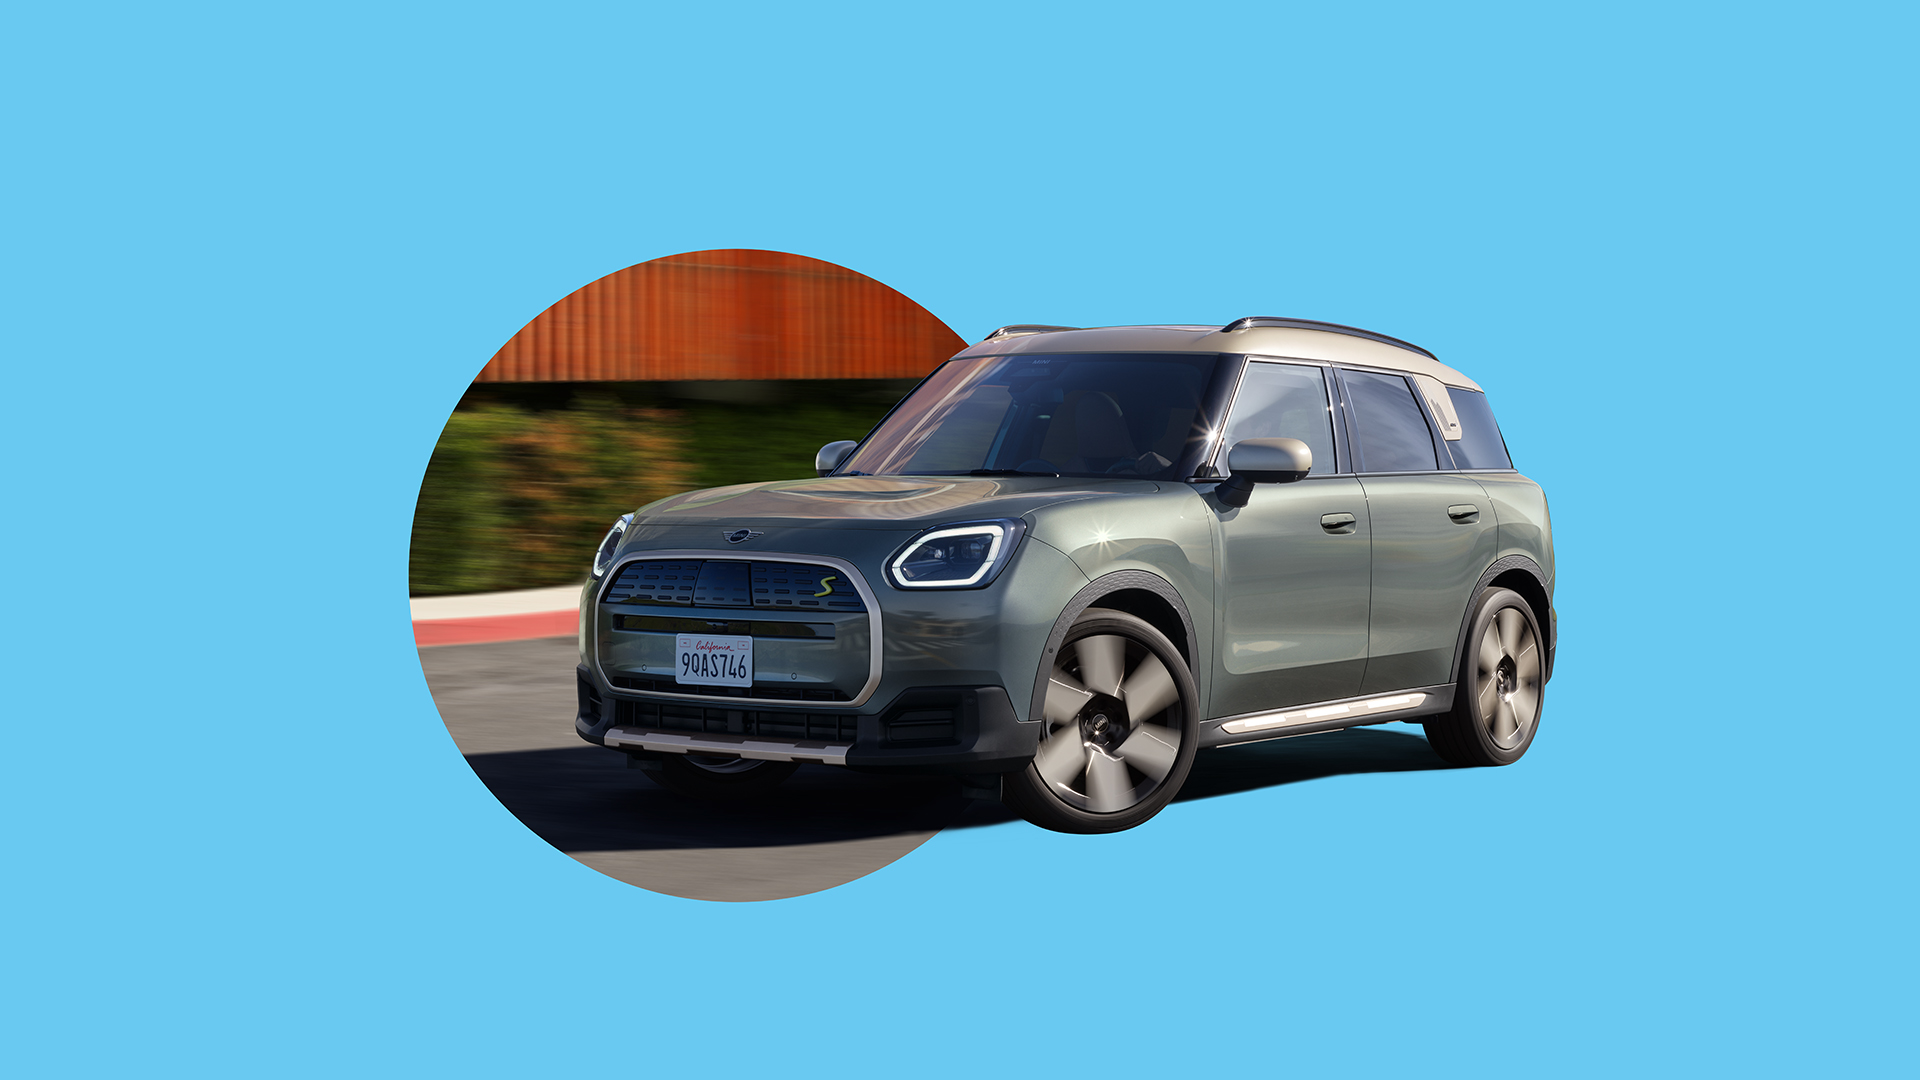 https://www.mini.com/content/dam/MINI/marketCOM/common/assets/images/content/new-family/the-very-first-all-electric-mini-countryman/the-very-first-all-electric-mini-countryman-stage-16-9-3072x1728-v2.jpg